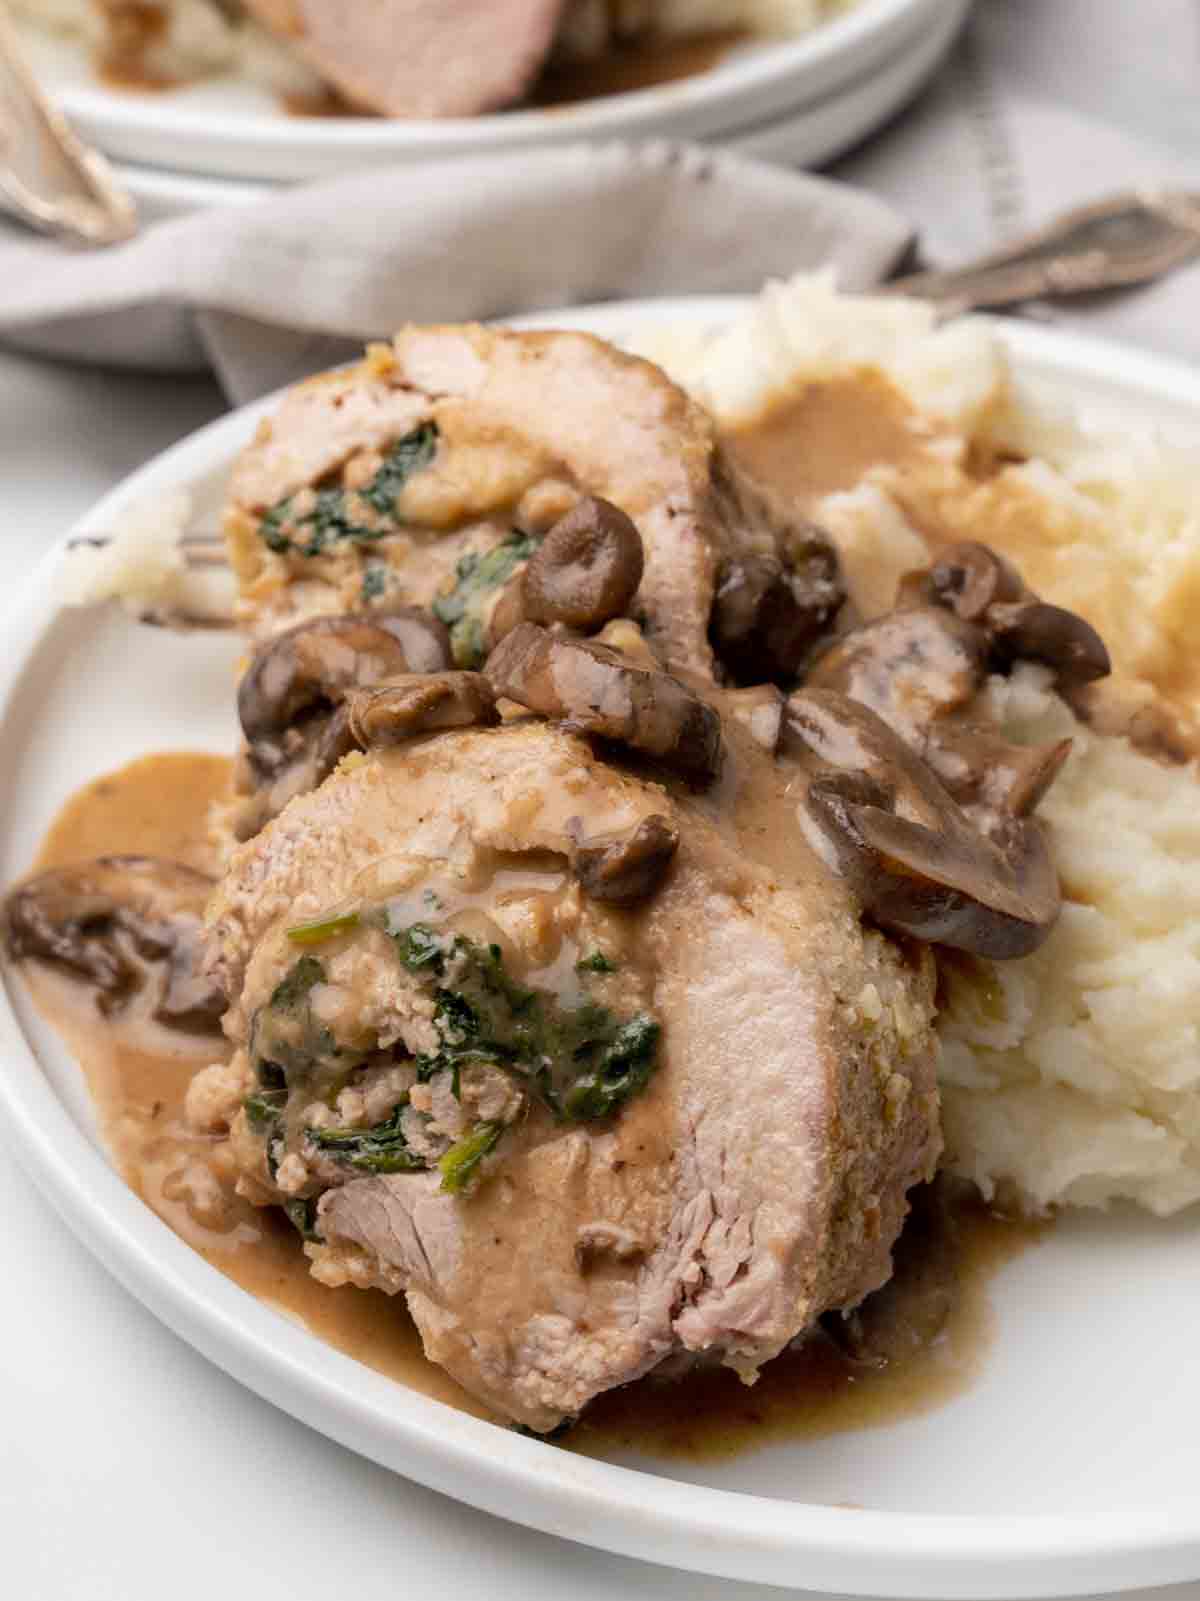 slices of stuffed pork on a white plate with mashed potatoes